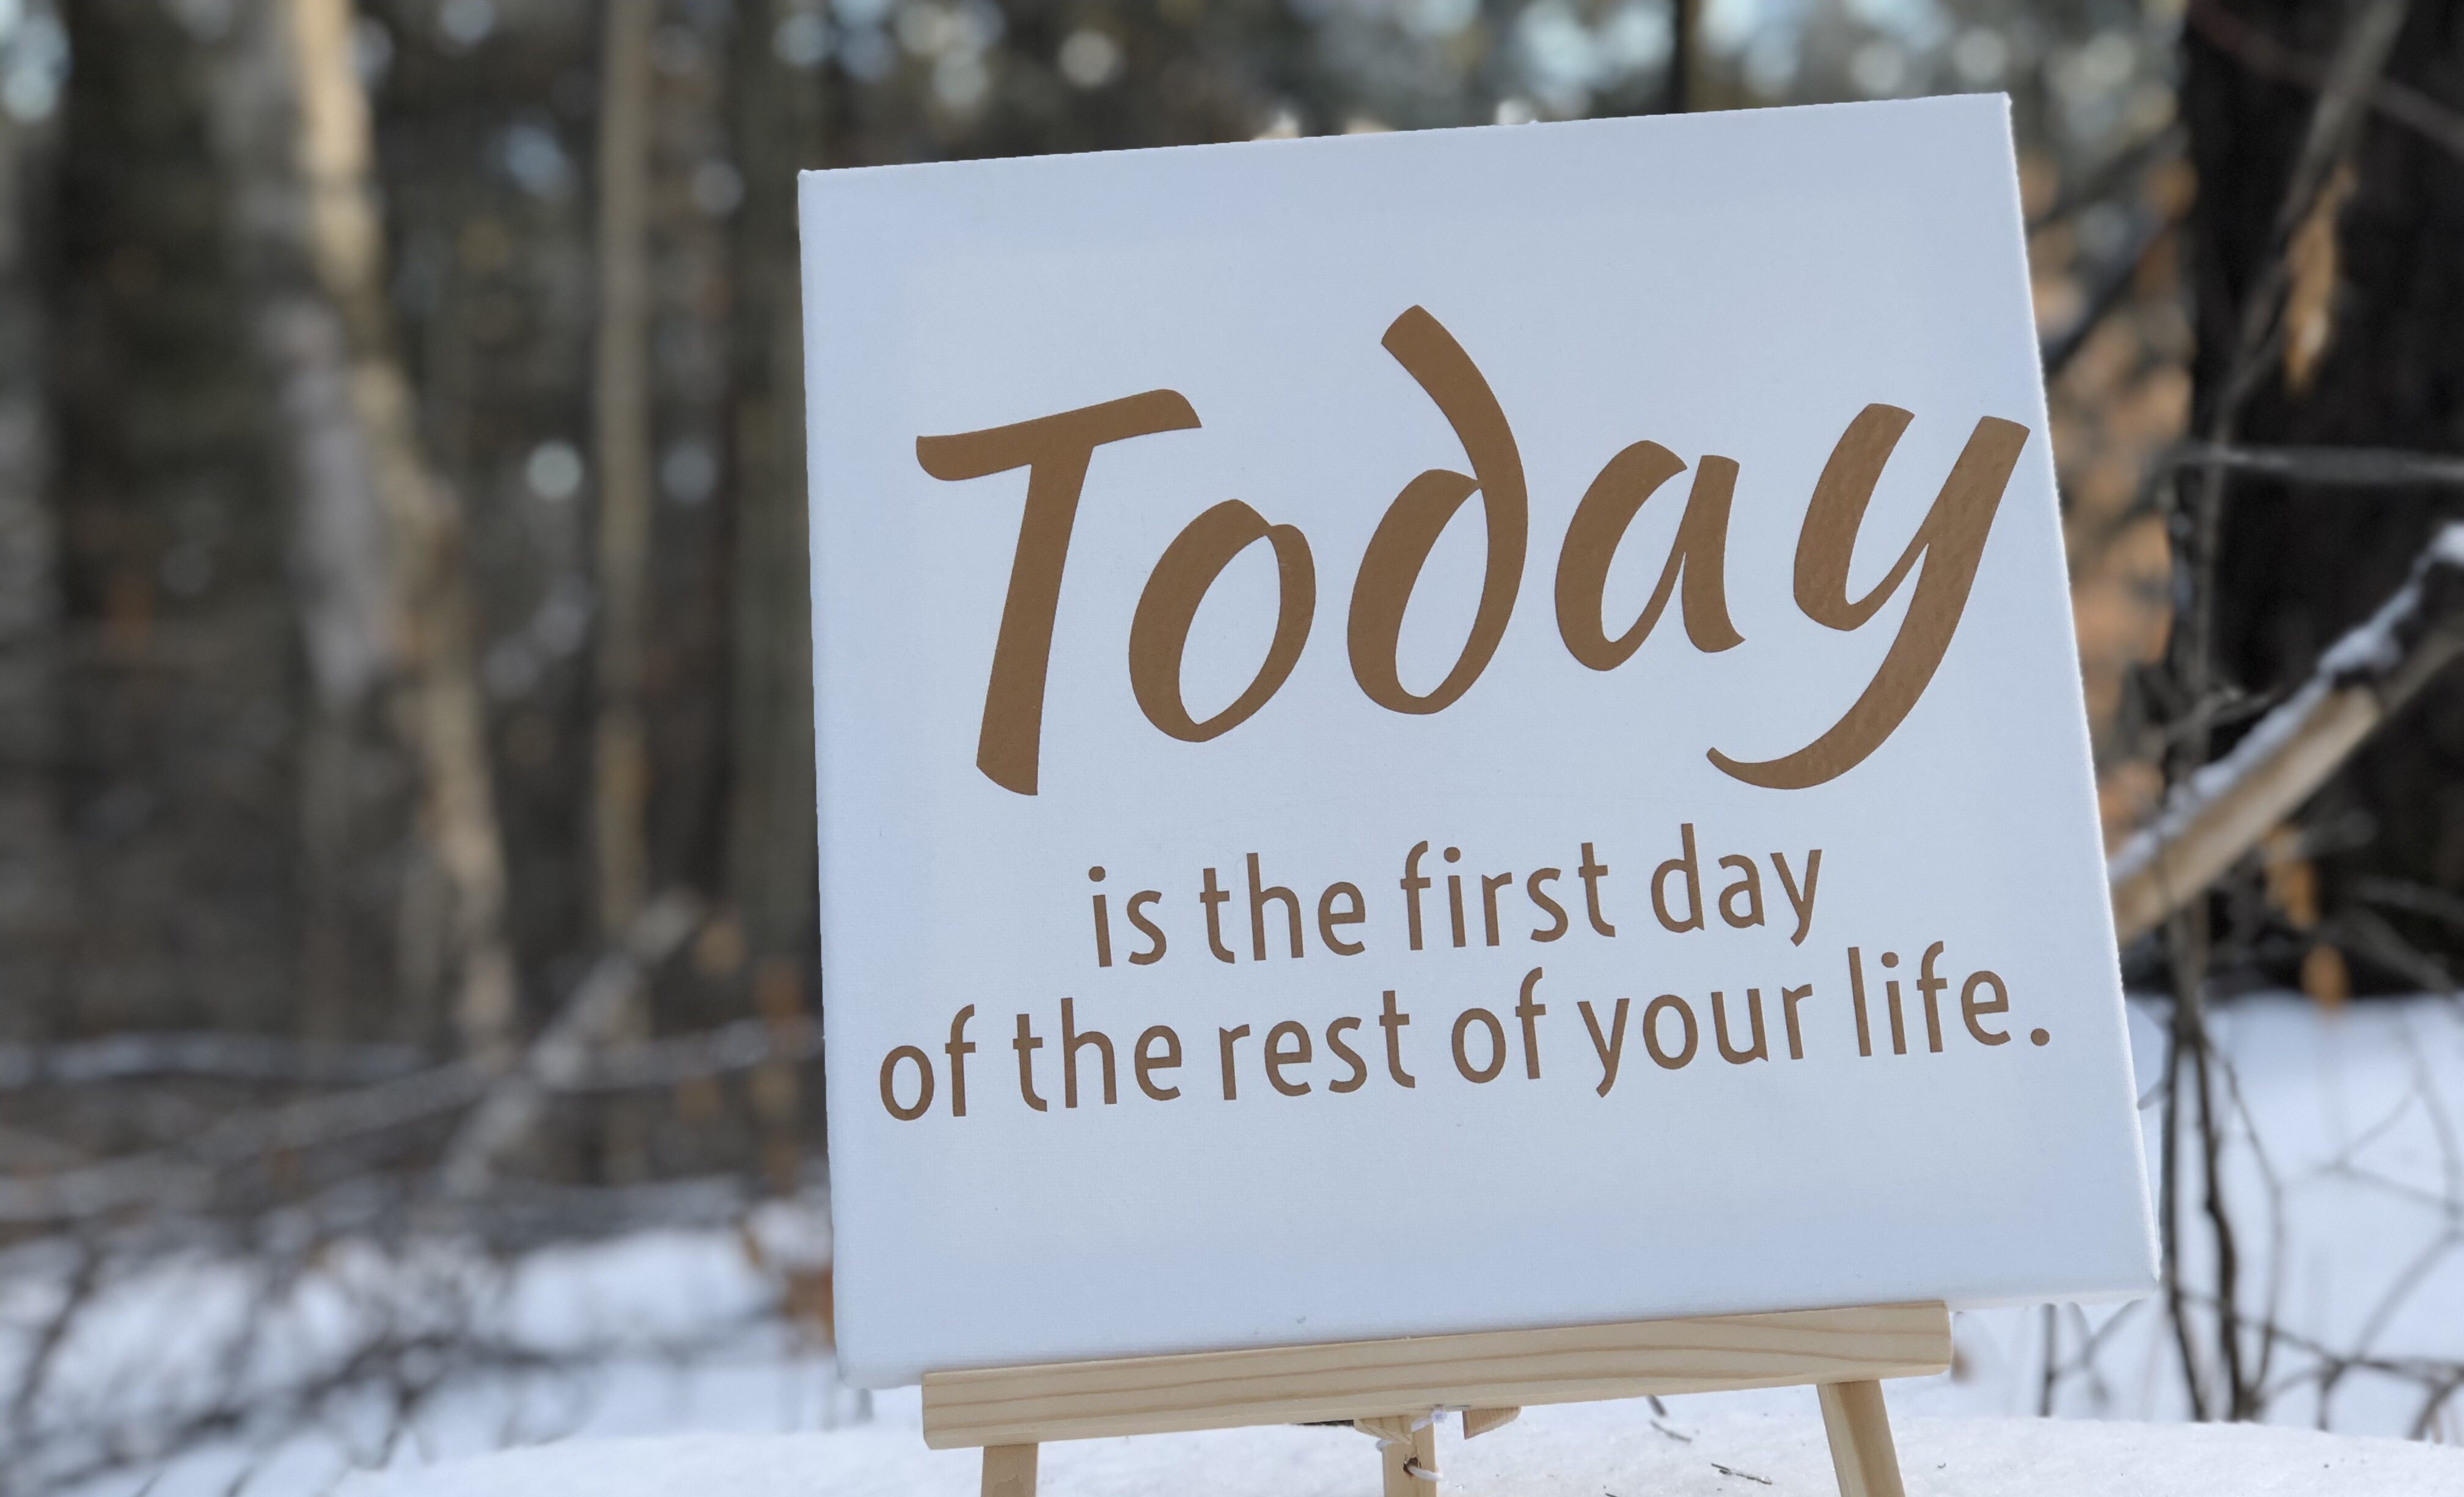 Perseverance quote: Today is the first day of the rest of your life.